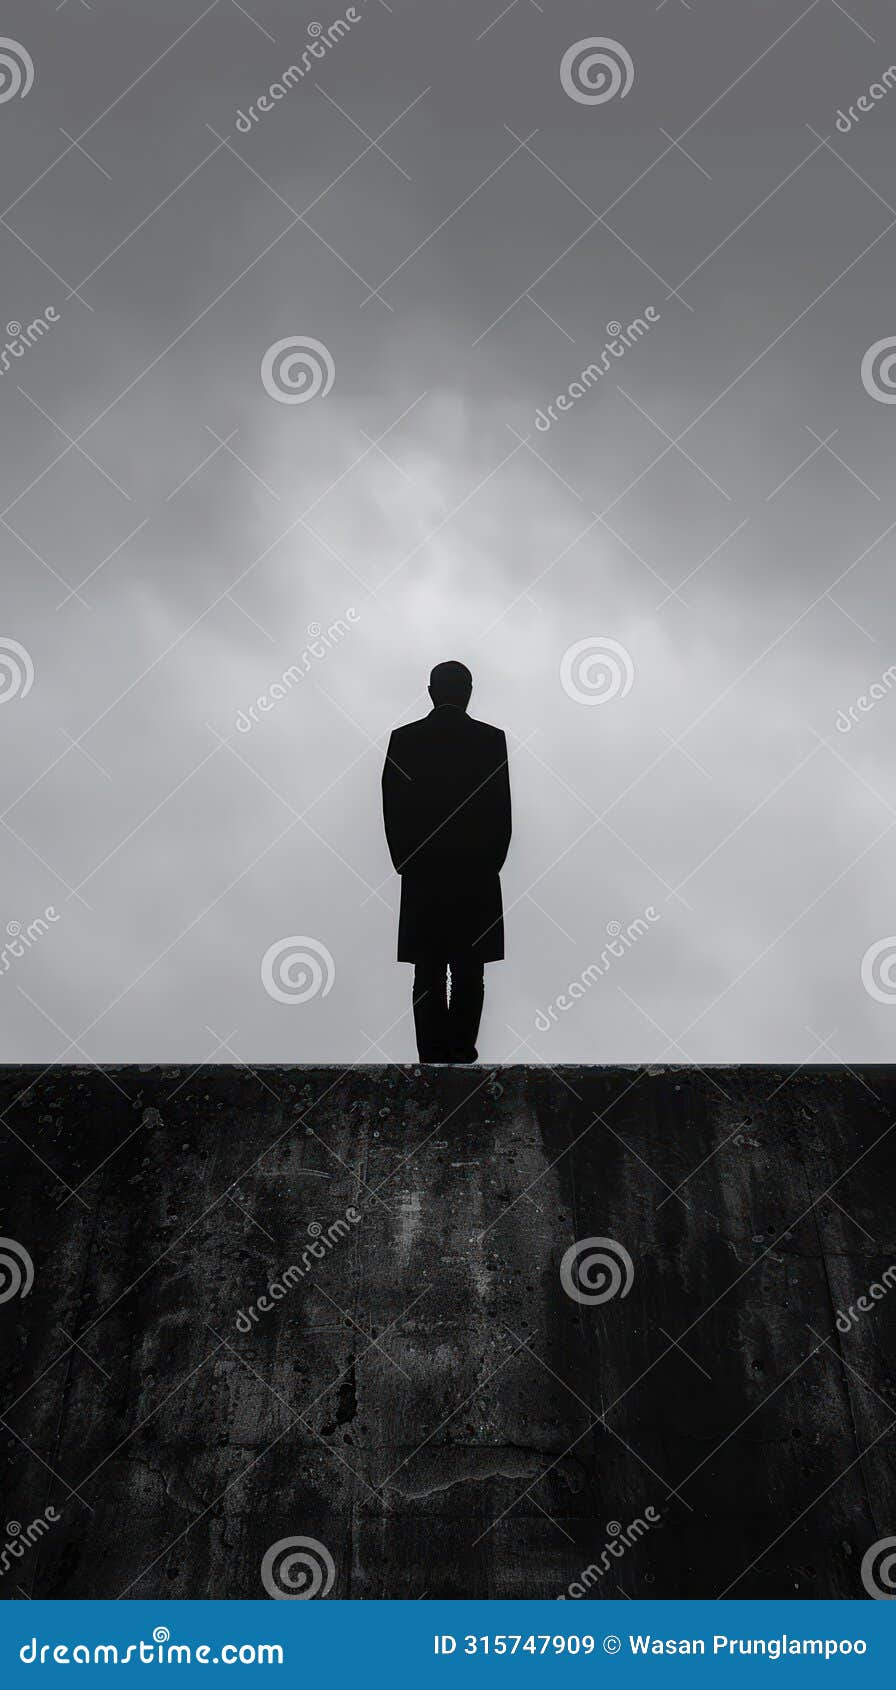 a dark figure stands on a wall, looking out over a bleak landscape